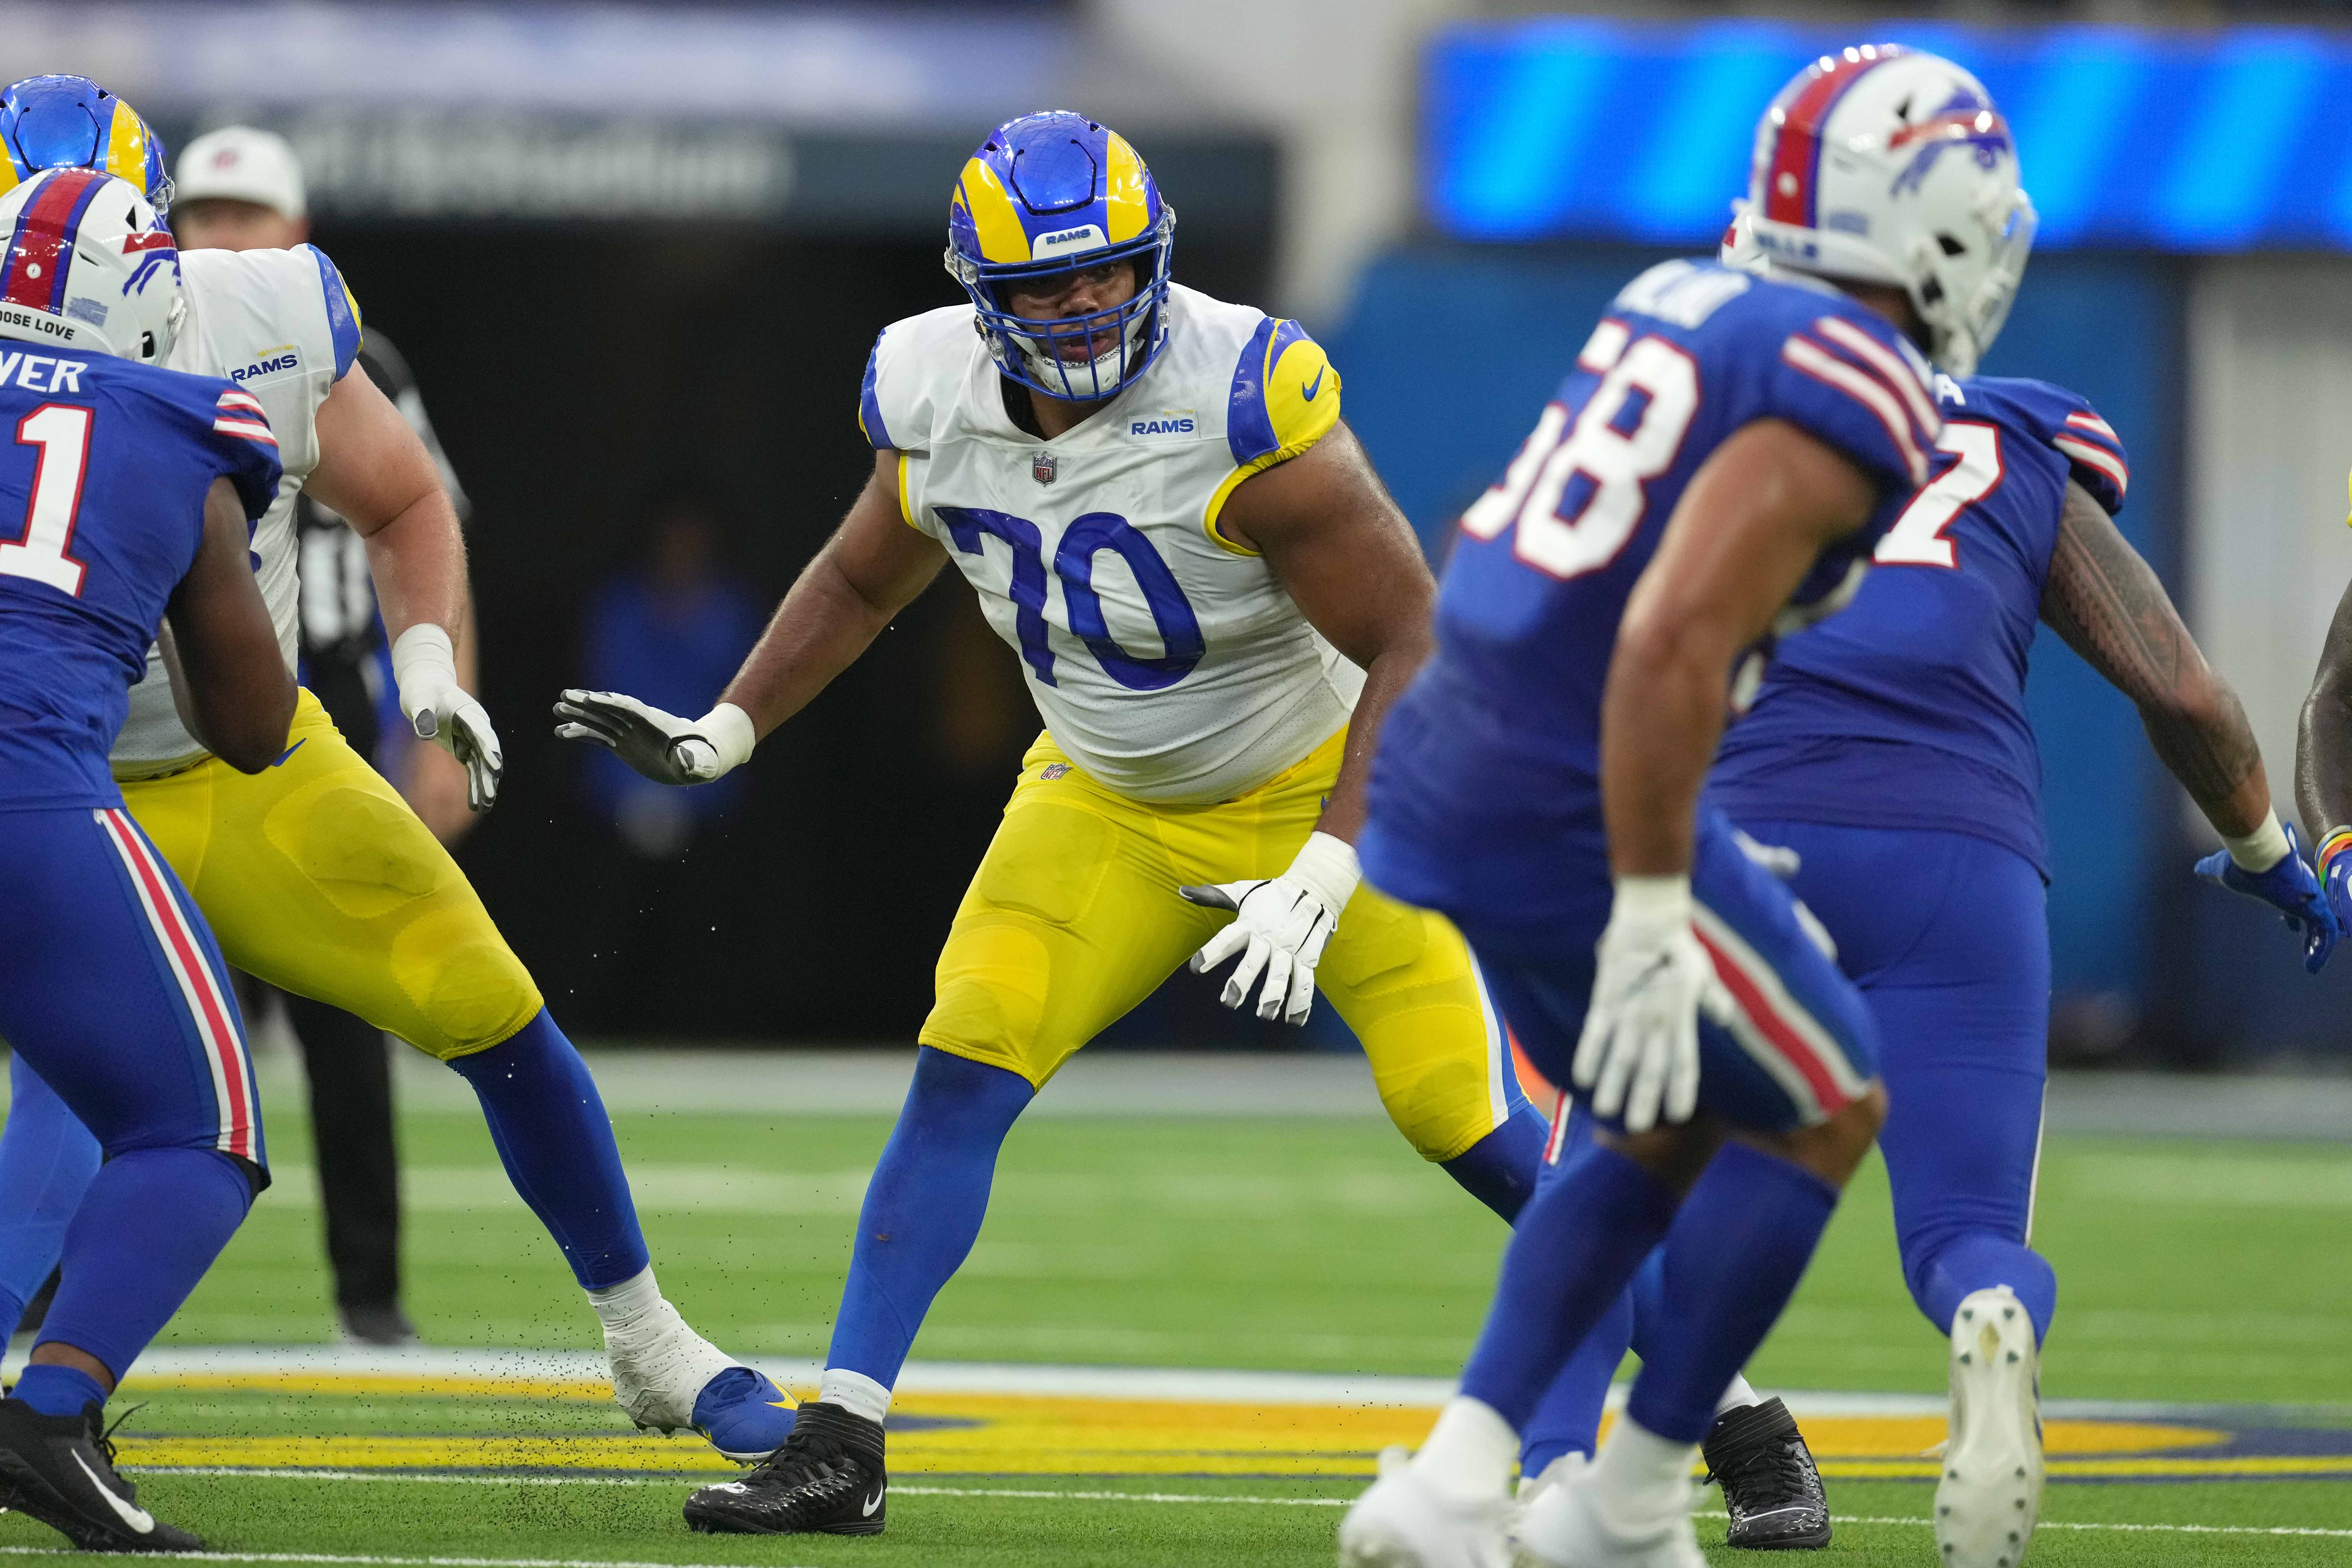 Sep 8, 2022; Inglewood, California, USA; Los Angeles Rams offensive tackle Joe Noteboom (70) blocks during the game against the Buffalo Bills at SoFi Stadium. The Bills defeated the Rams 31-10. Mandatory Credit: Kirby Lee-USA TODAY Sports